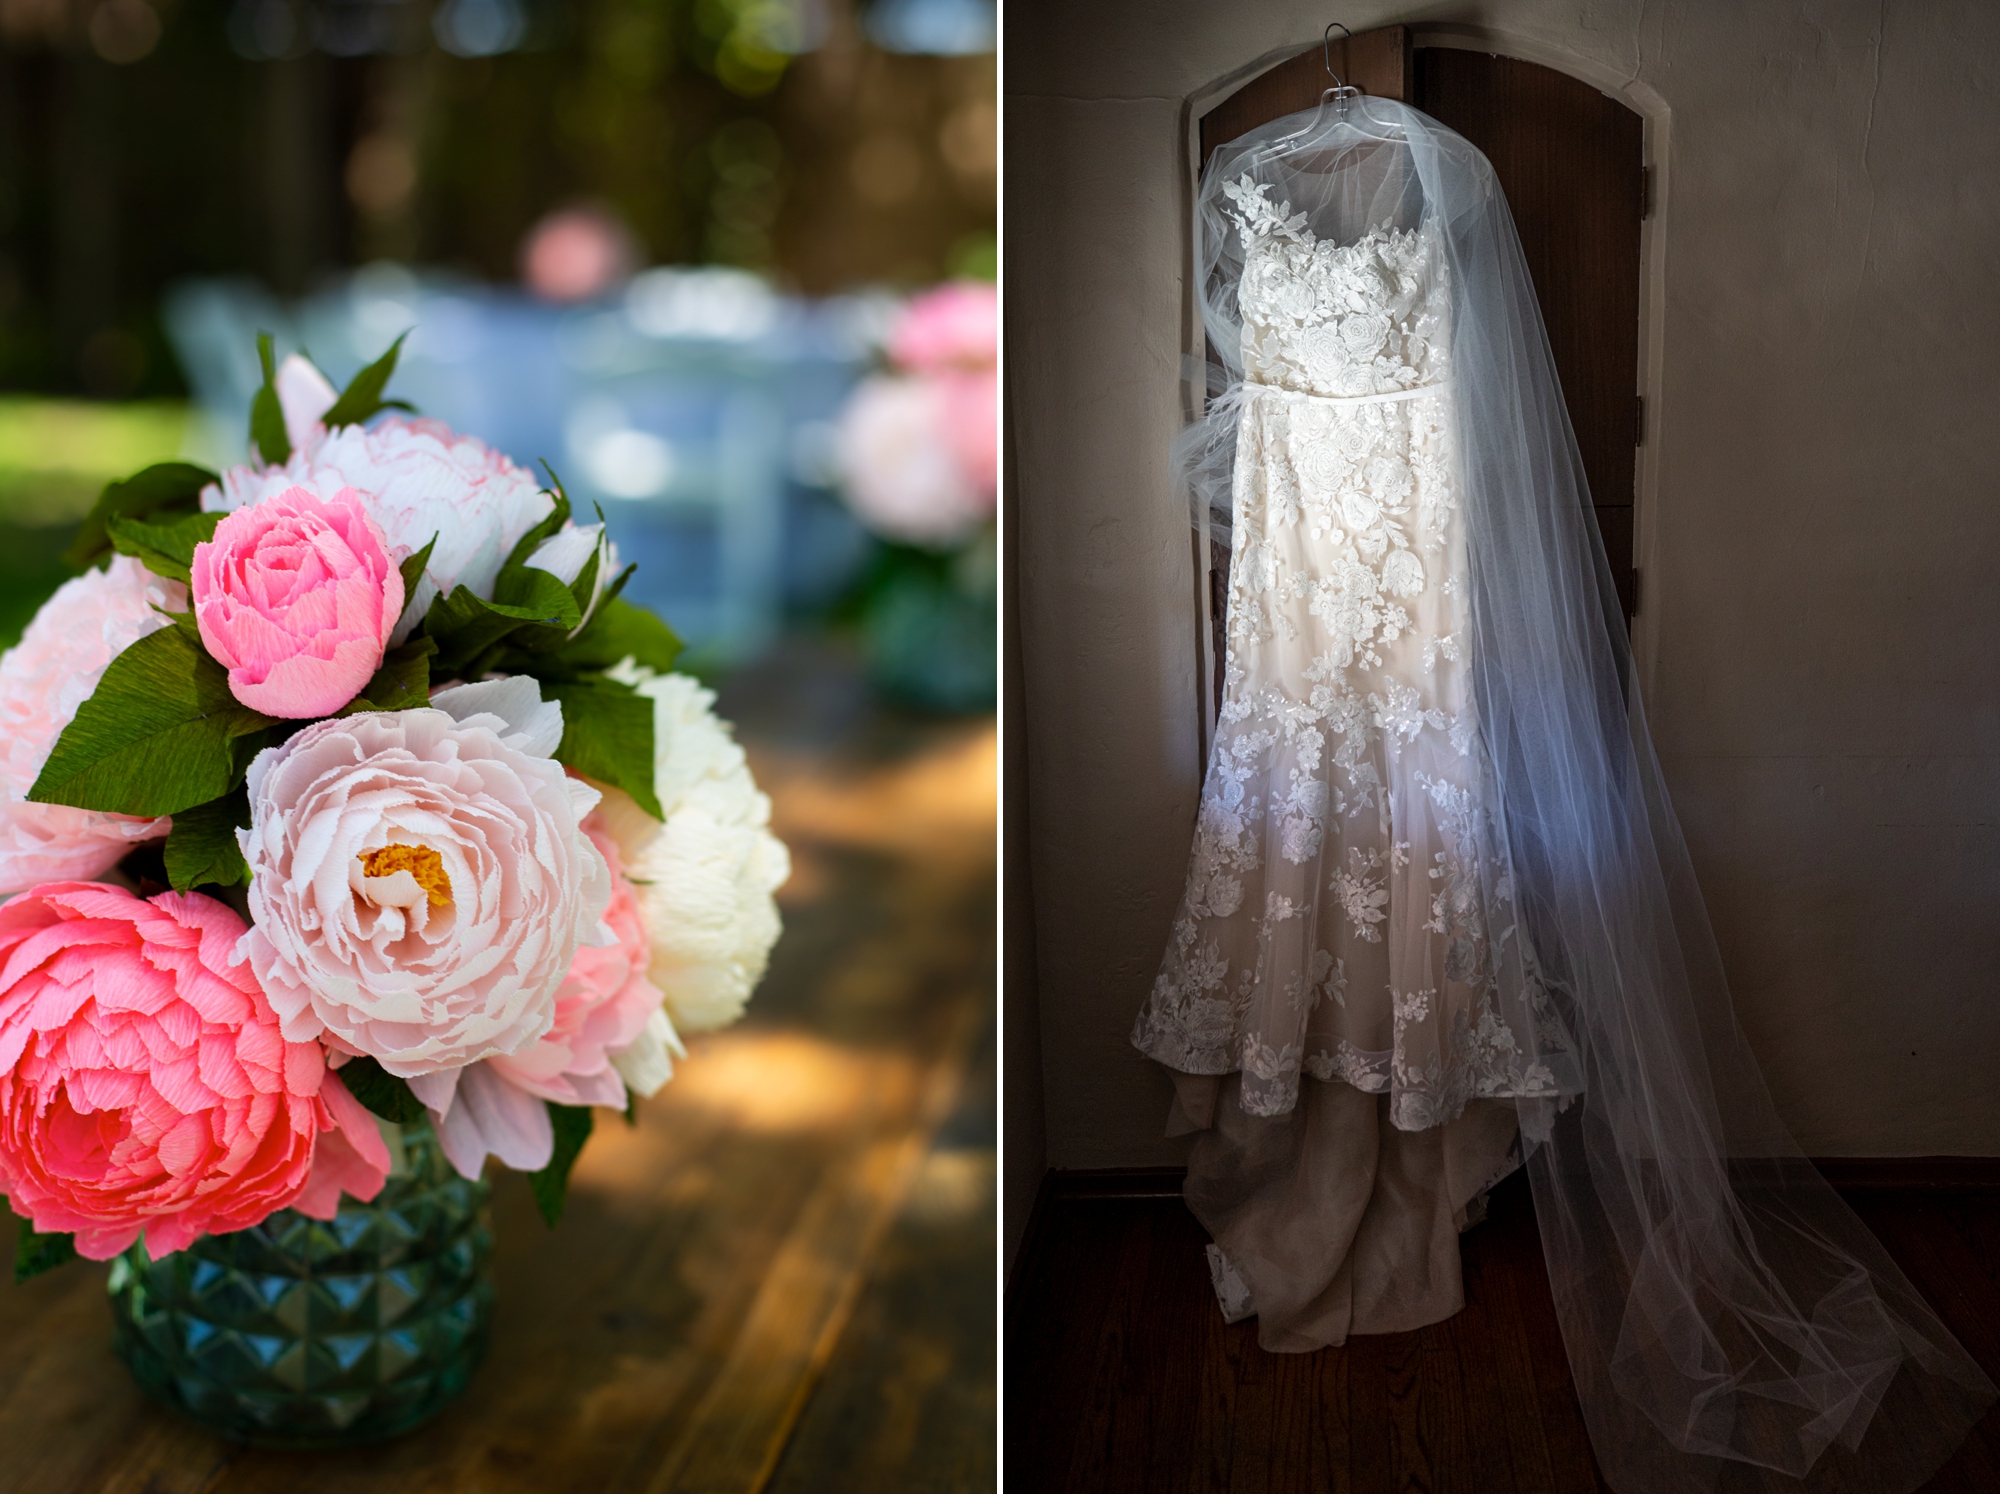 Wedding details at the Griffith House